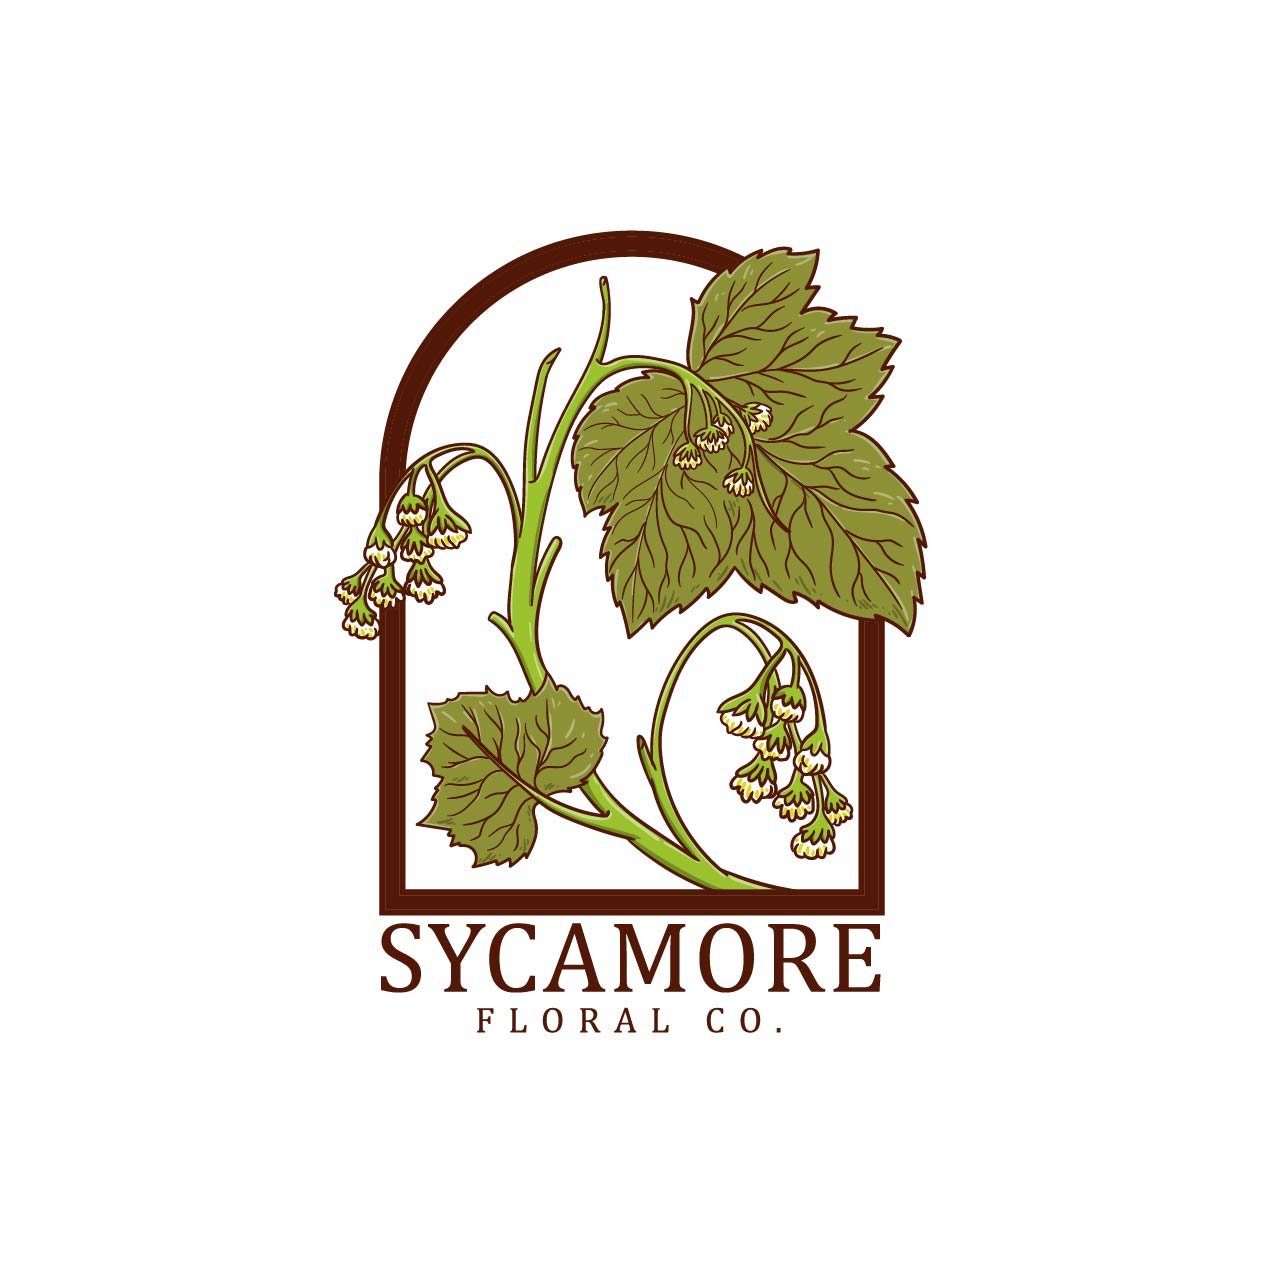 Sycamore Floral Co.